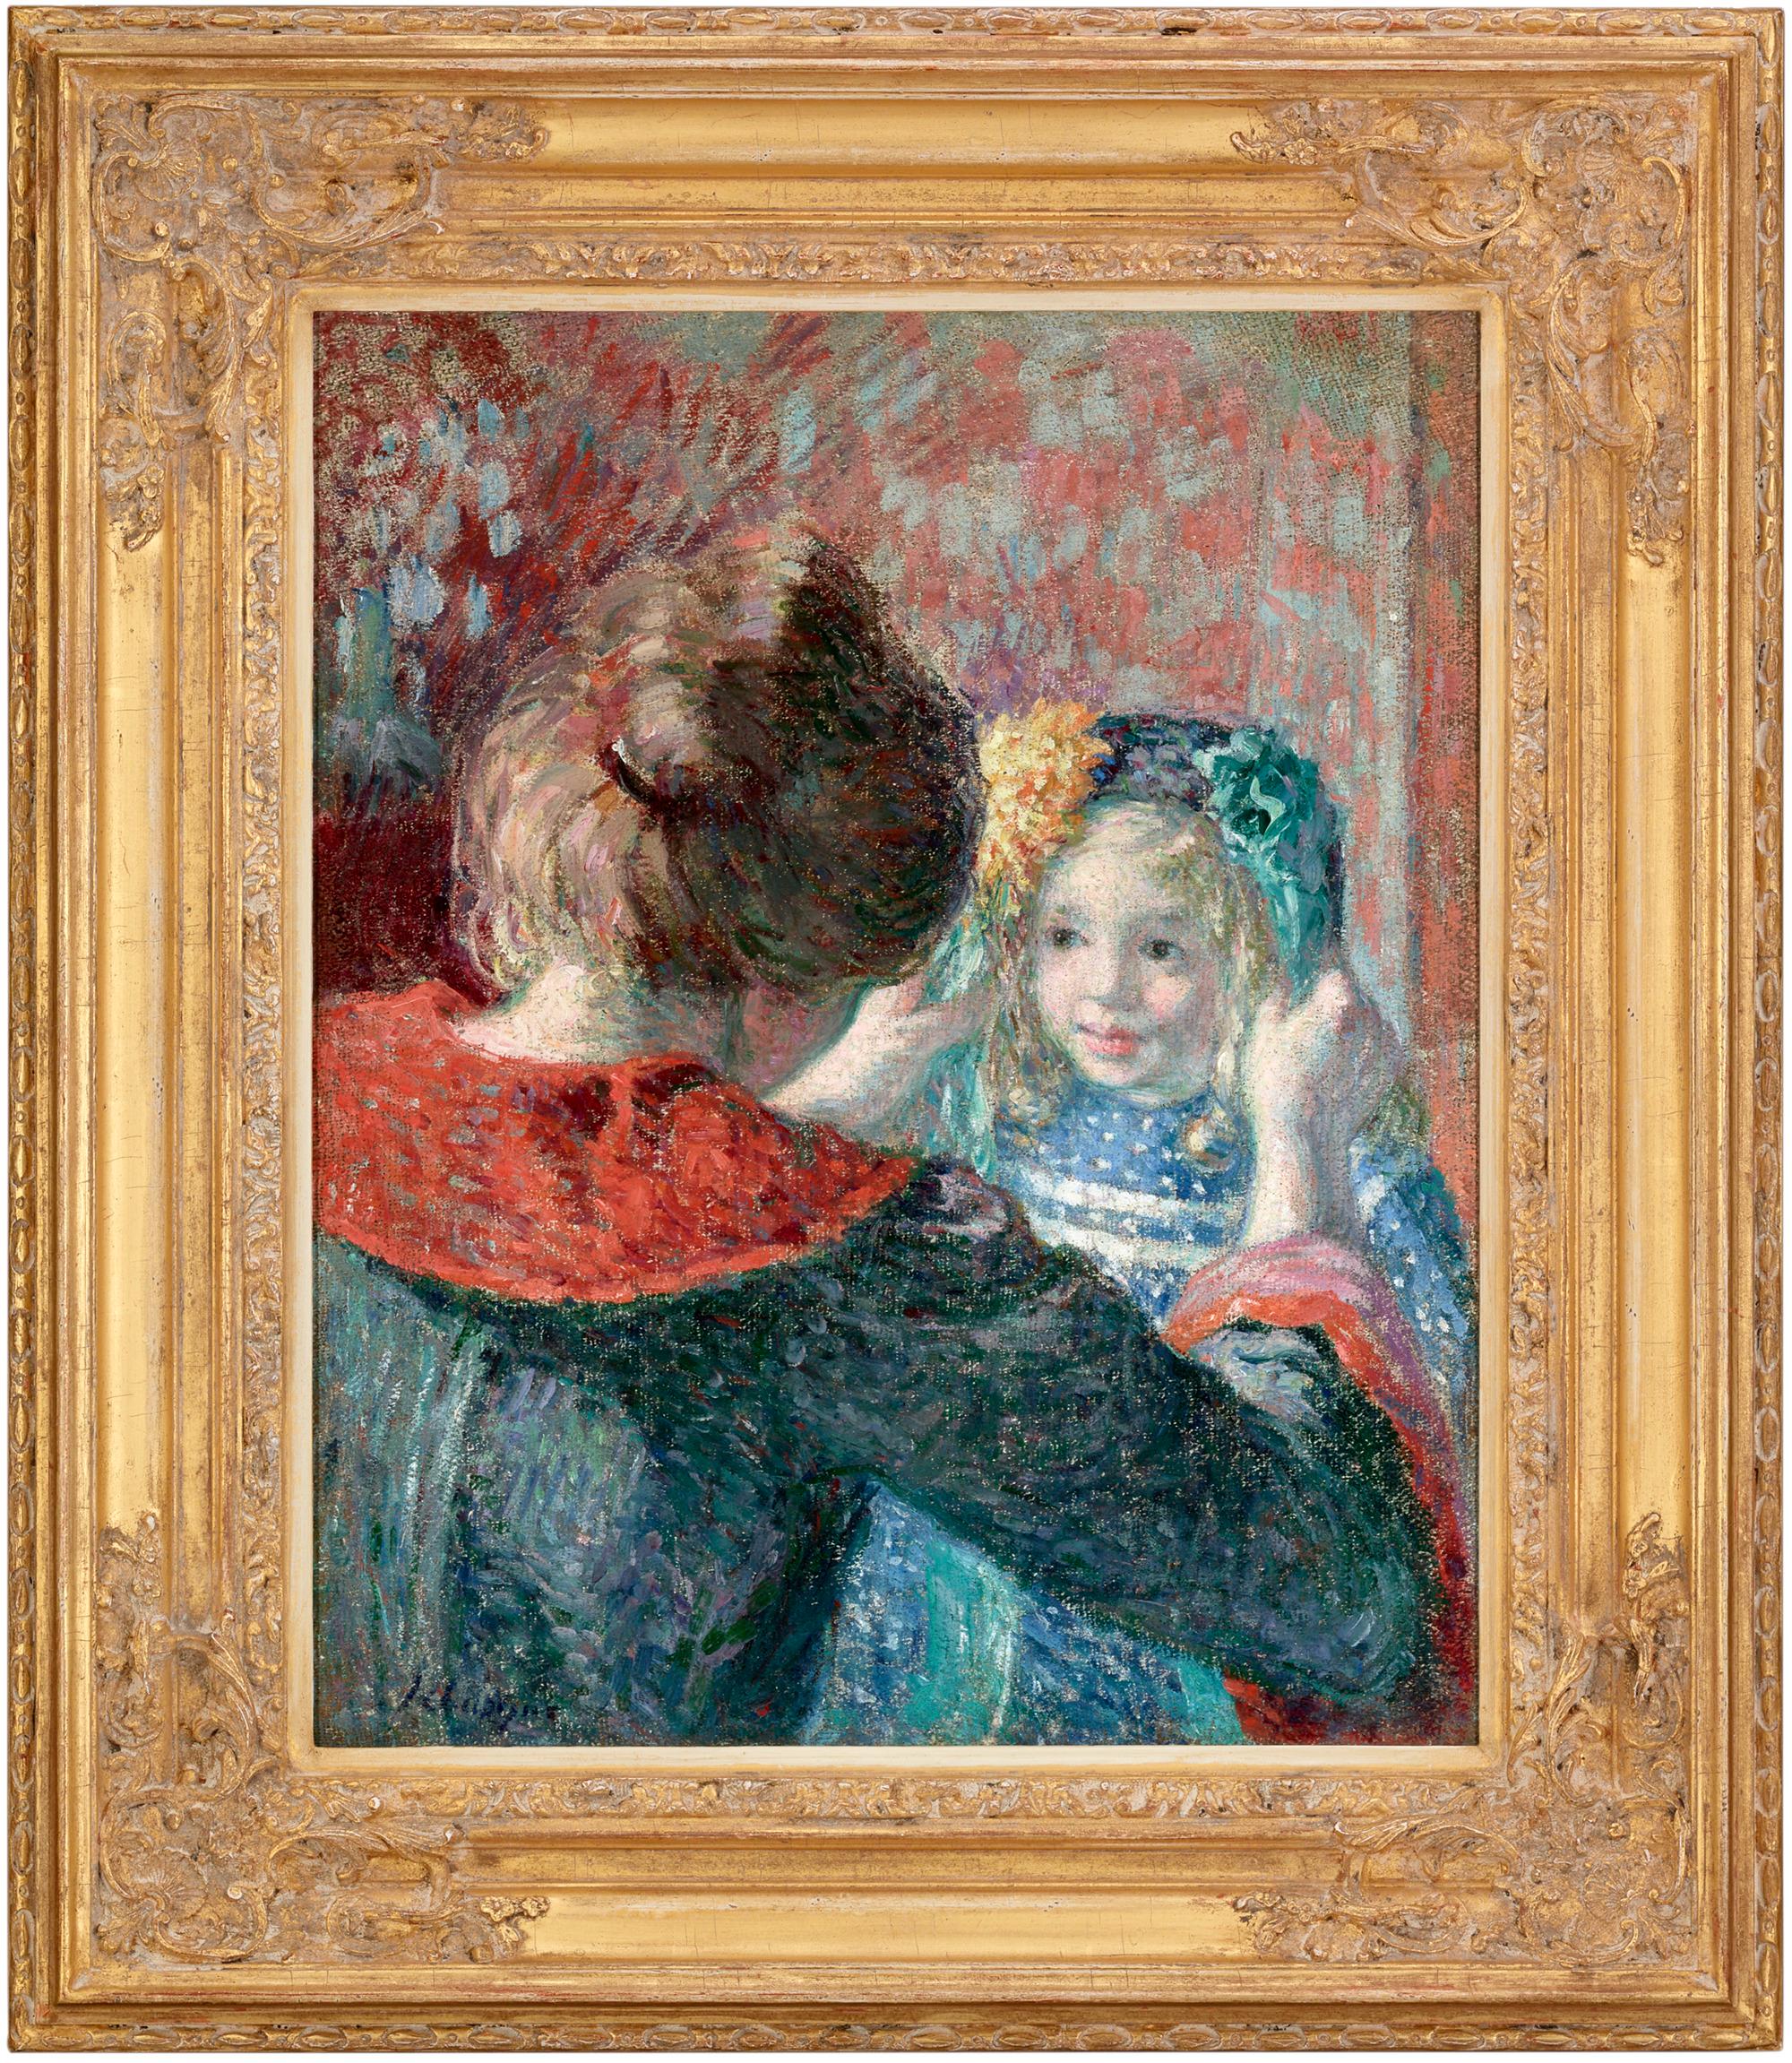 Madame Lebasque et sa fille Marthe (Madame Lebasque and her Daughter Marthe) - Painting by Henri Lebasque